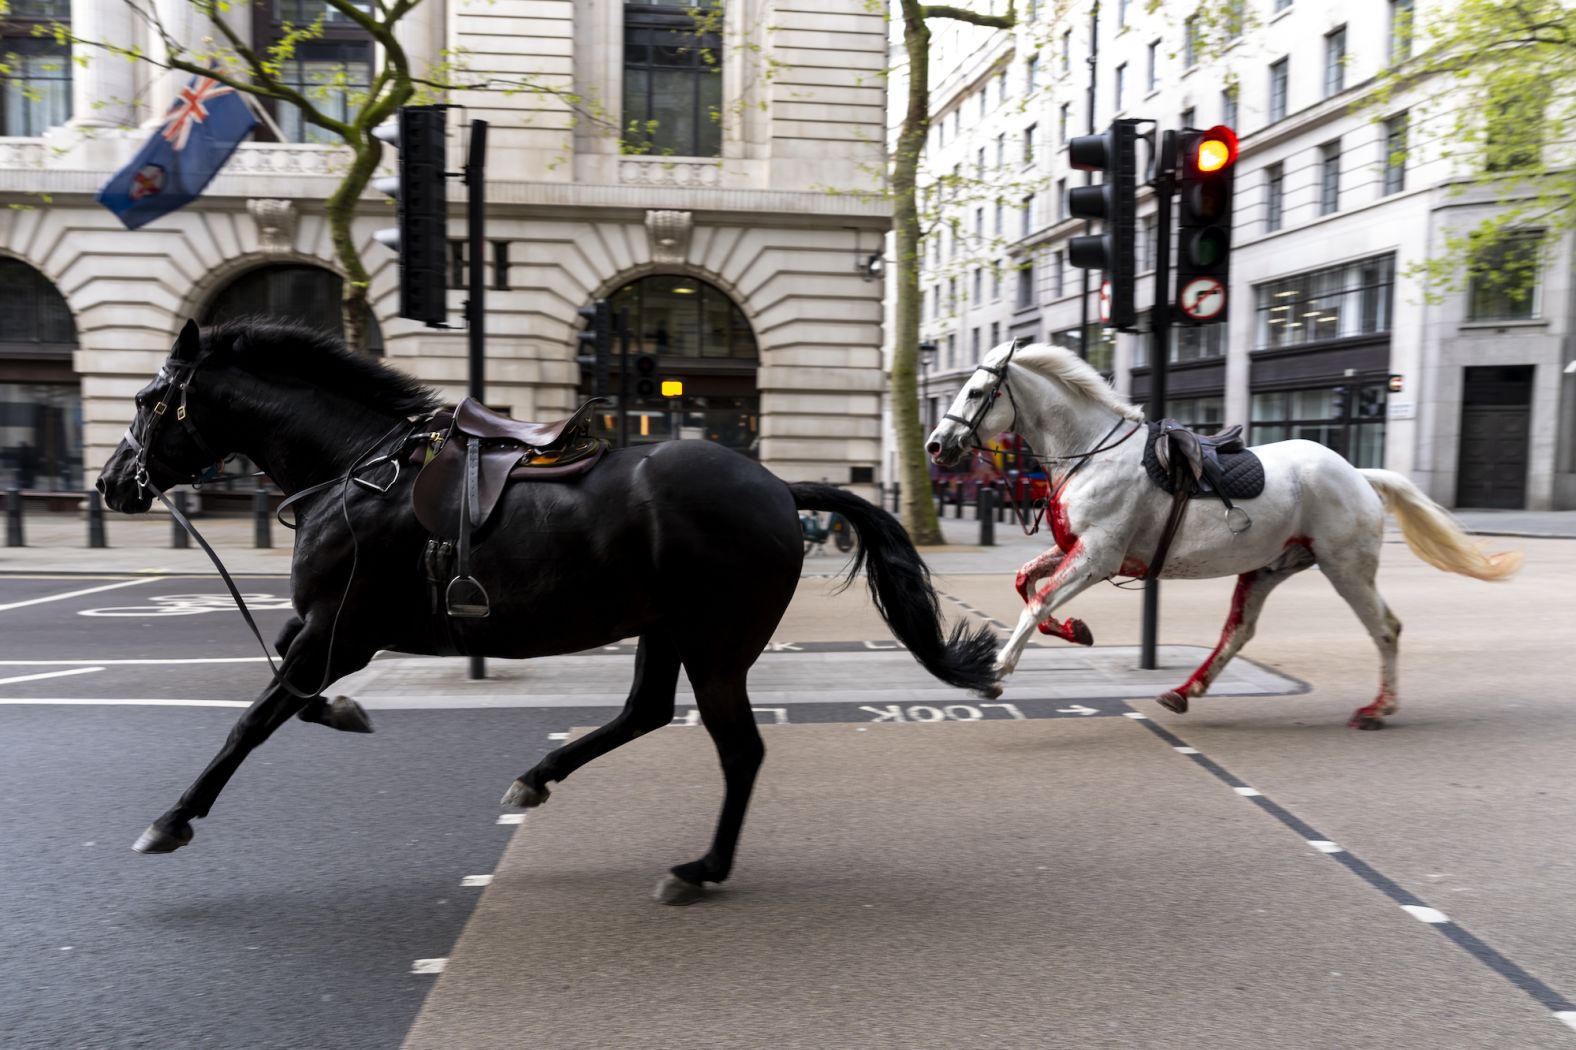 Two Household Cavalry horses run through the streets of London after <a href="index.php?page=&url=https%3A%2F%2Fwww.cnn.com%2F2024%2F04%2F25%2Fuk%2Flondon-escaped-horses-condition-gbr-scli-intl%2Findex.html" target="_blank">breaking free</a> on Wednesday, April 24. Six soldiers and seven horses were taking part in an exercise that morning when the animals became spooked after some concrete fell off a conveyor belt being used in nearby construction work and hit the ground, according to the British Army. The army said in an update on X on Thursday that five horses tried to bolt and four broke loose. They were recovered, but two are in "a serious condition," a British government minister said.